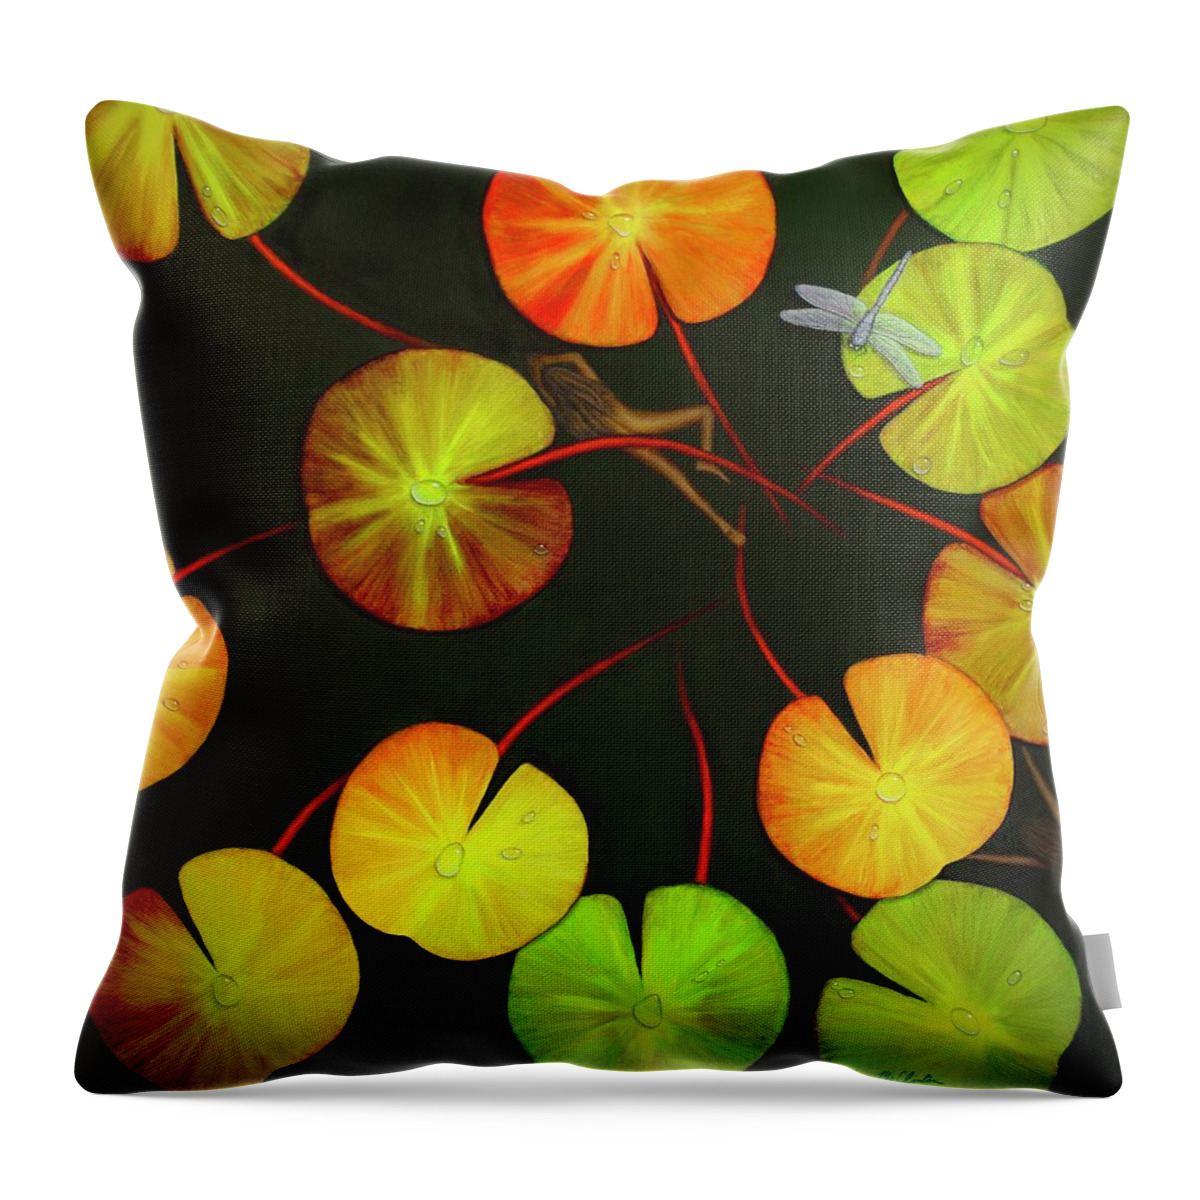 Kim Mcclinton Throw Pillow featuring the painting Immersion by Kim McClinton